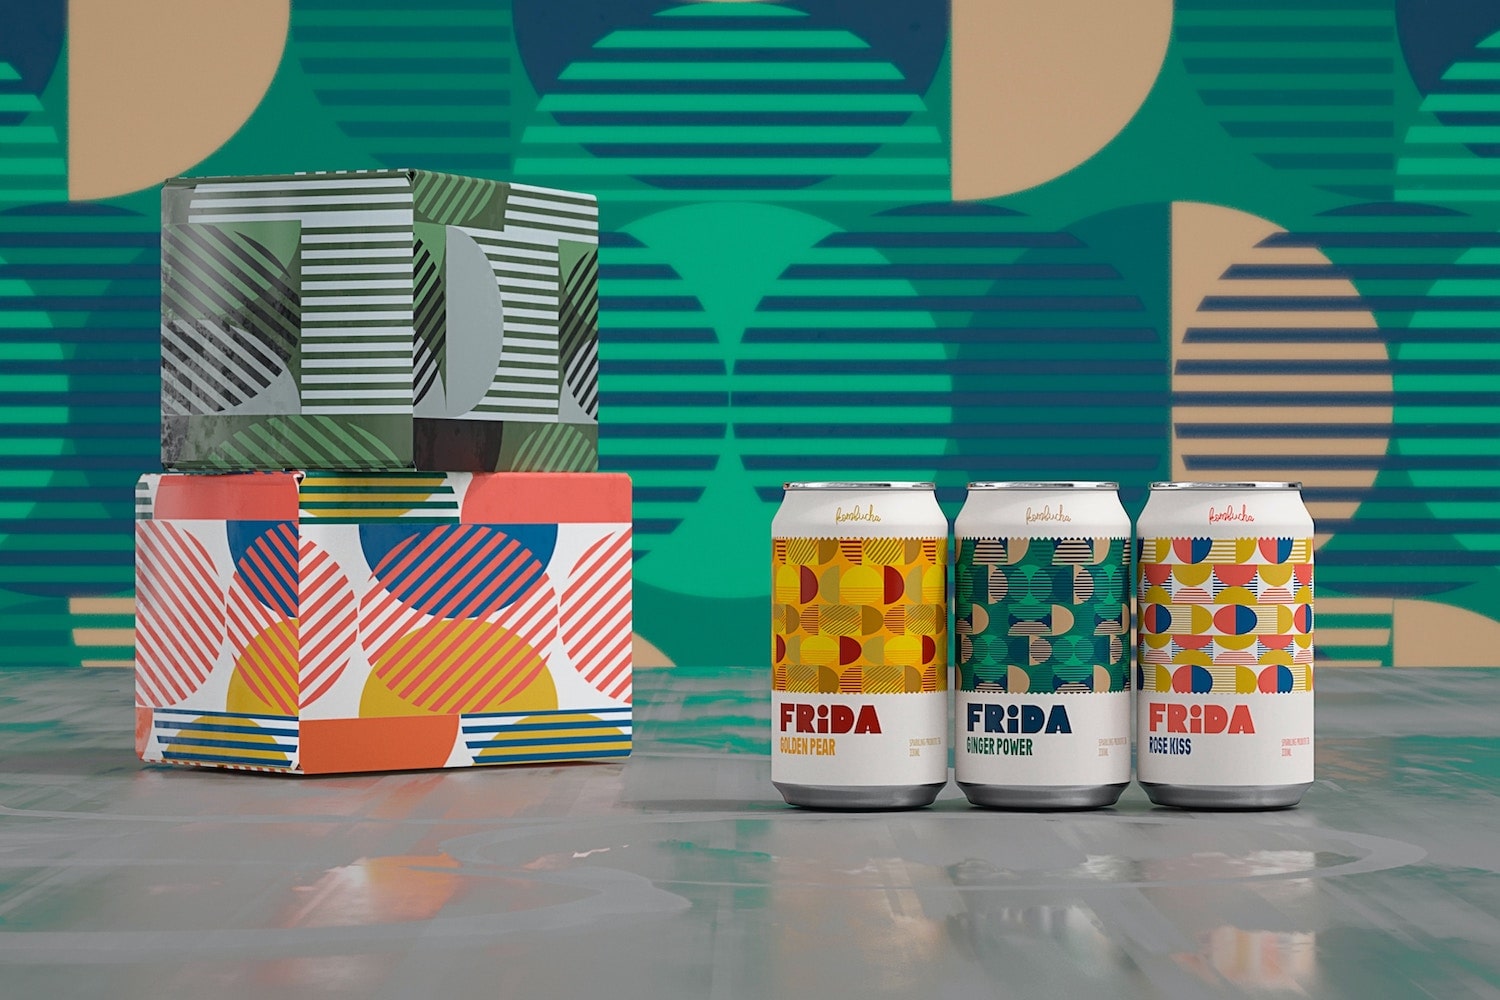 geometric shapes patterns abstract and bold packaging design ideas